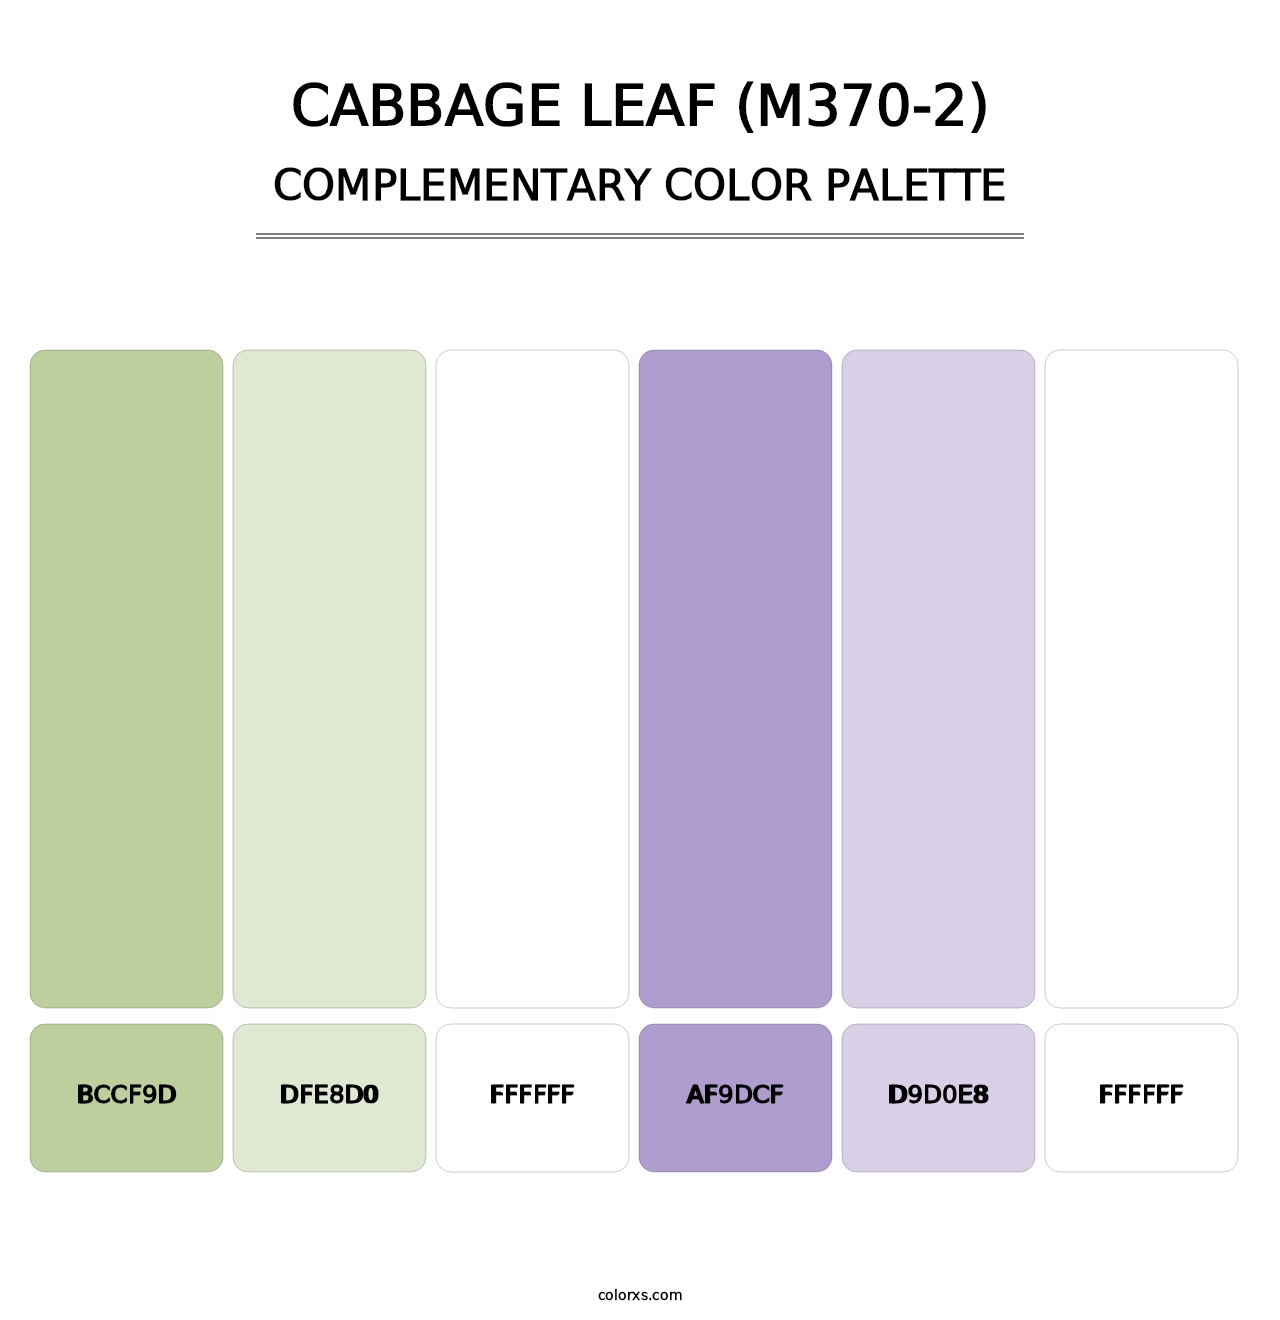 Cabbage Leaf (M370-2) - Complementary Color Palette